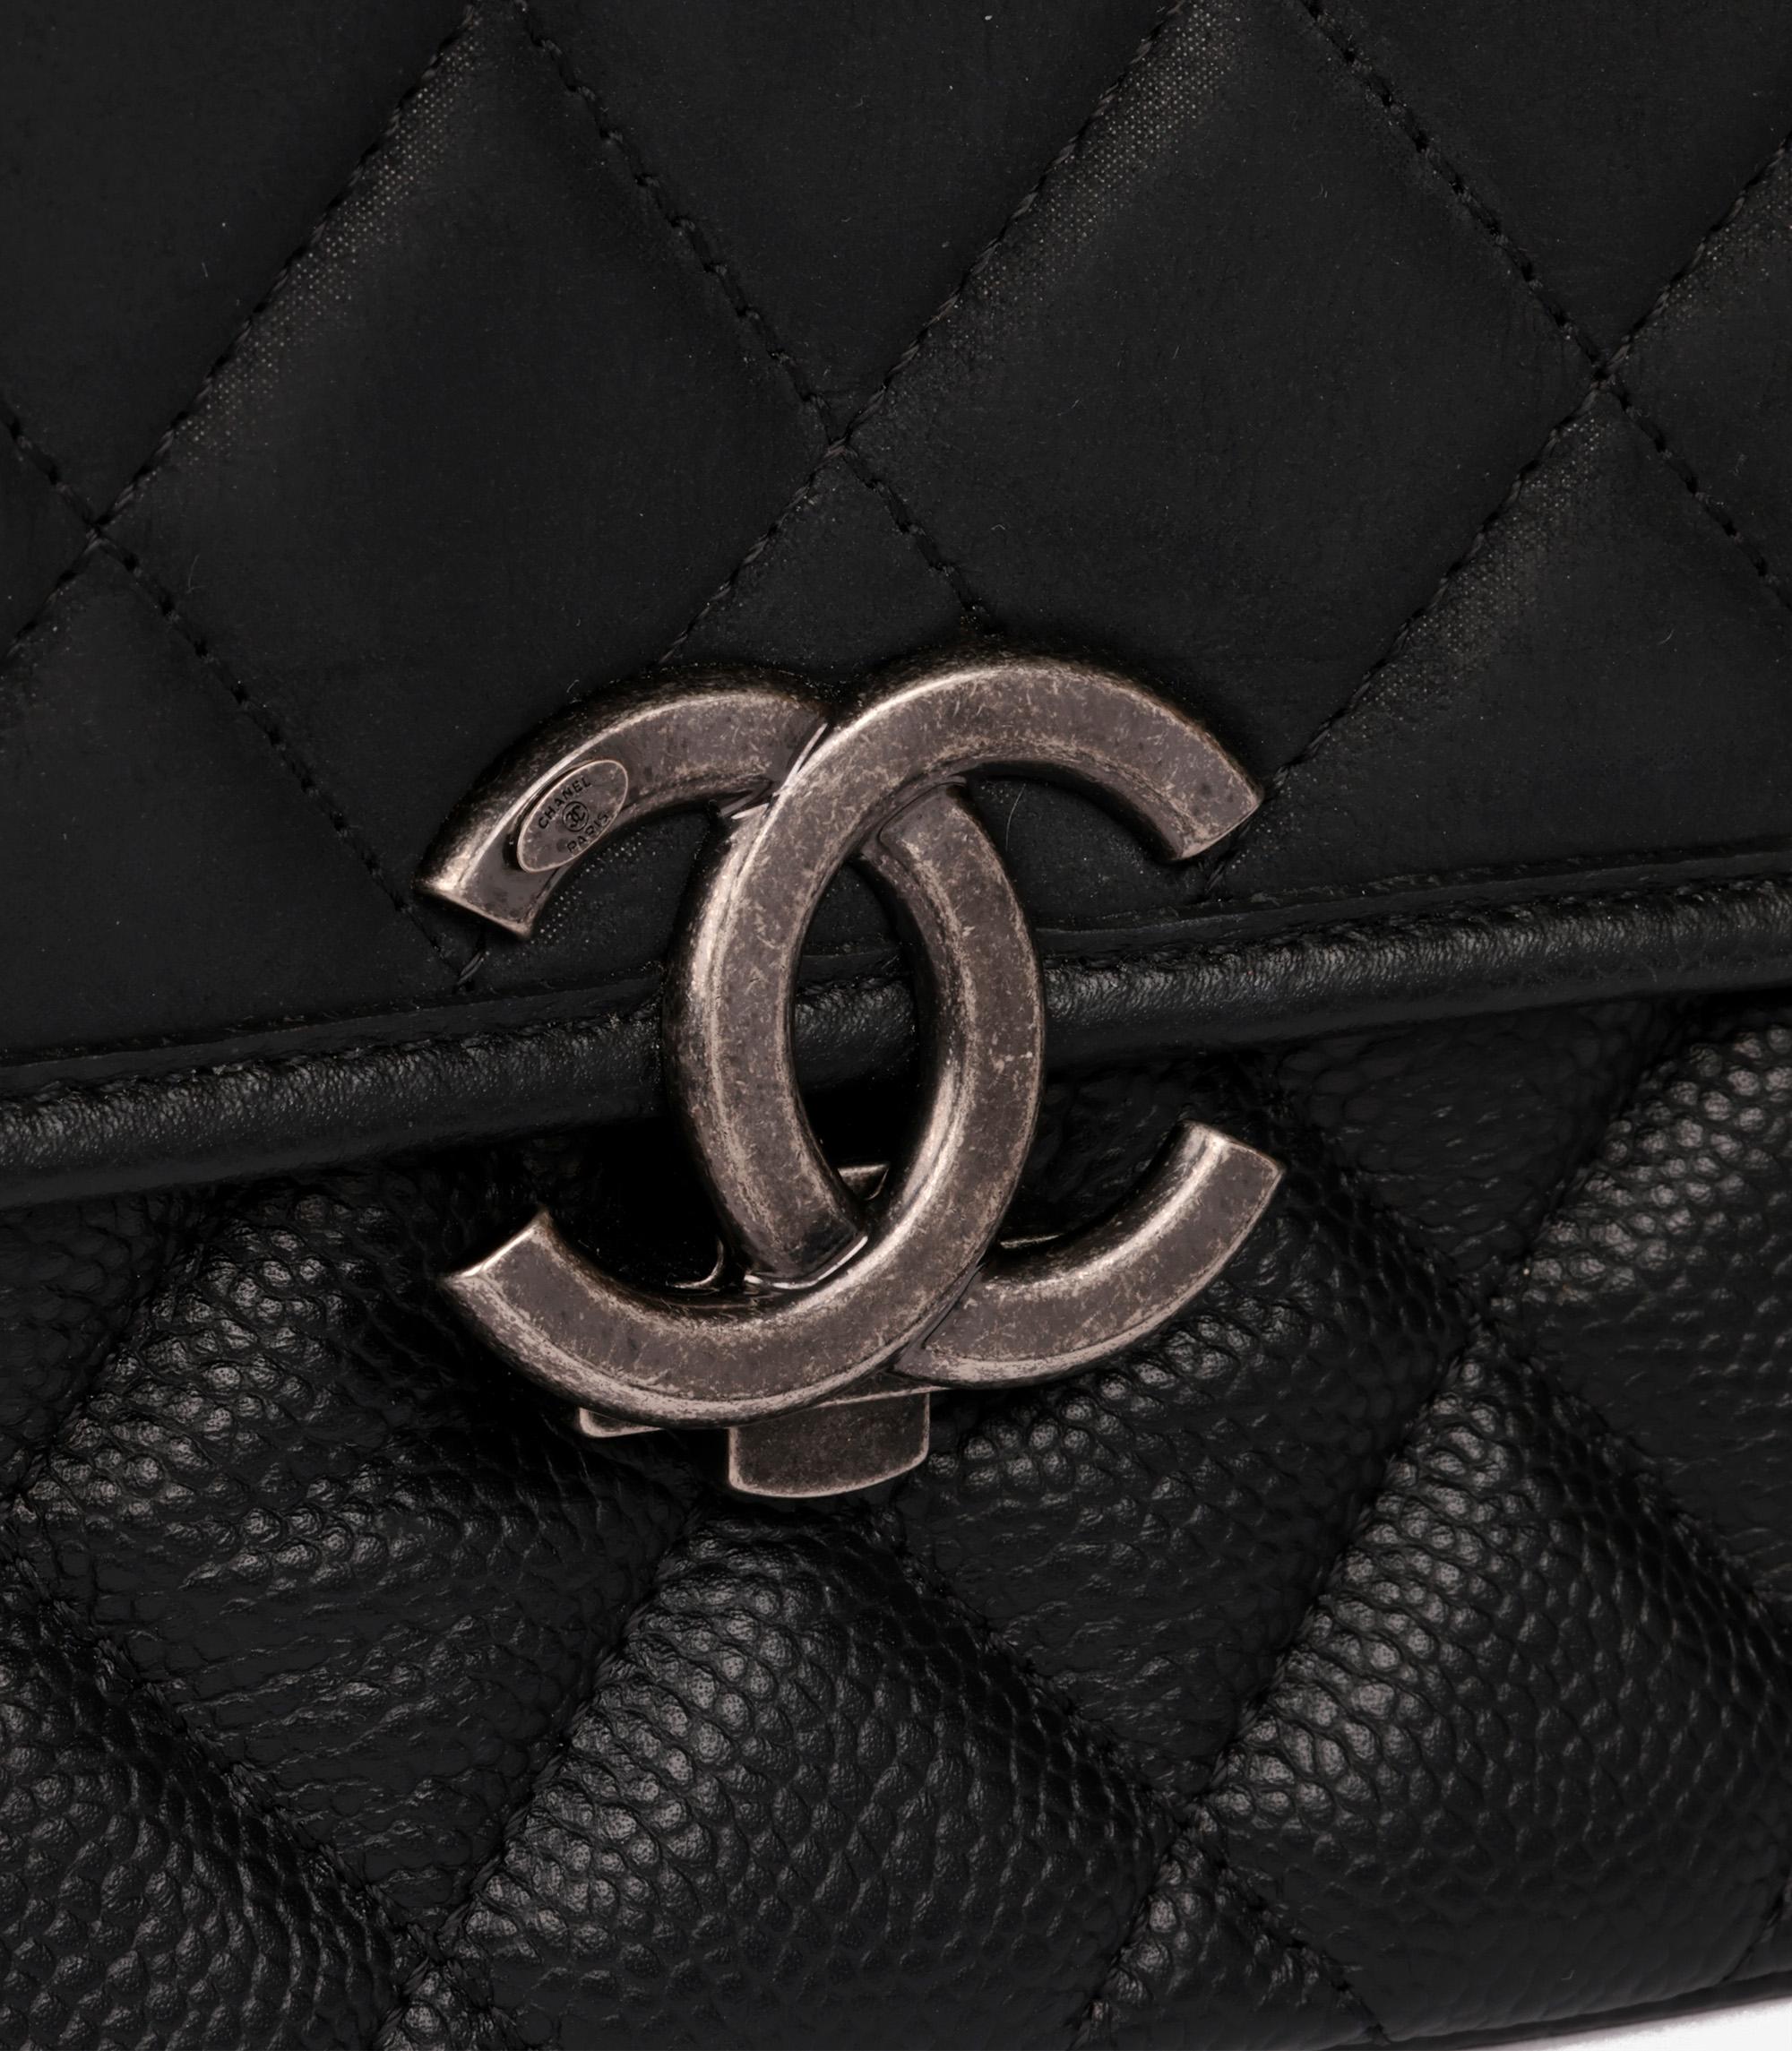 Chanel Black Quilted Caviar Leather & Iridescent Calfskin Daily Carry Messenger

Brand- Chanel
Model- Daily Carry Messenger
Product Type- Crossbody, Shoulder, Top Handle
Serial Number- 23******
Age- Circa 2017
Accompanied By- Chanel Dust Bag, Box,